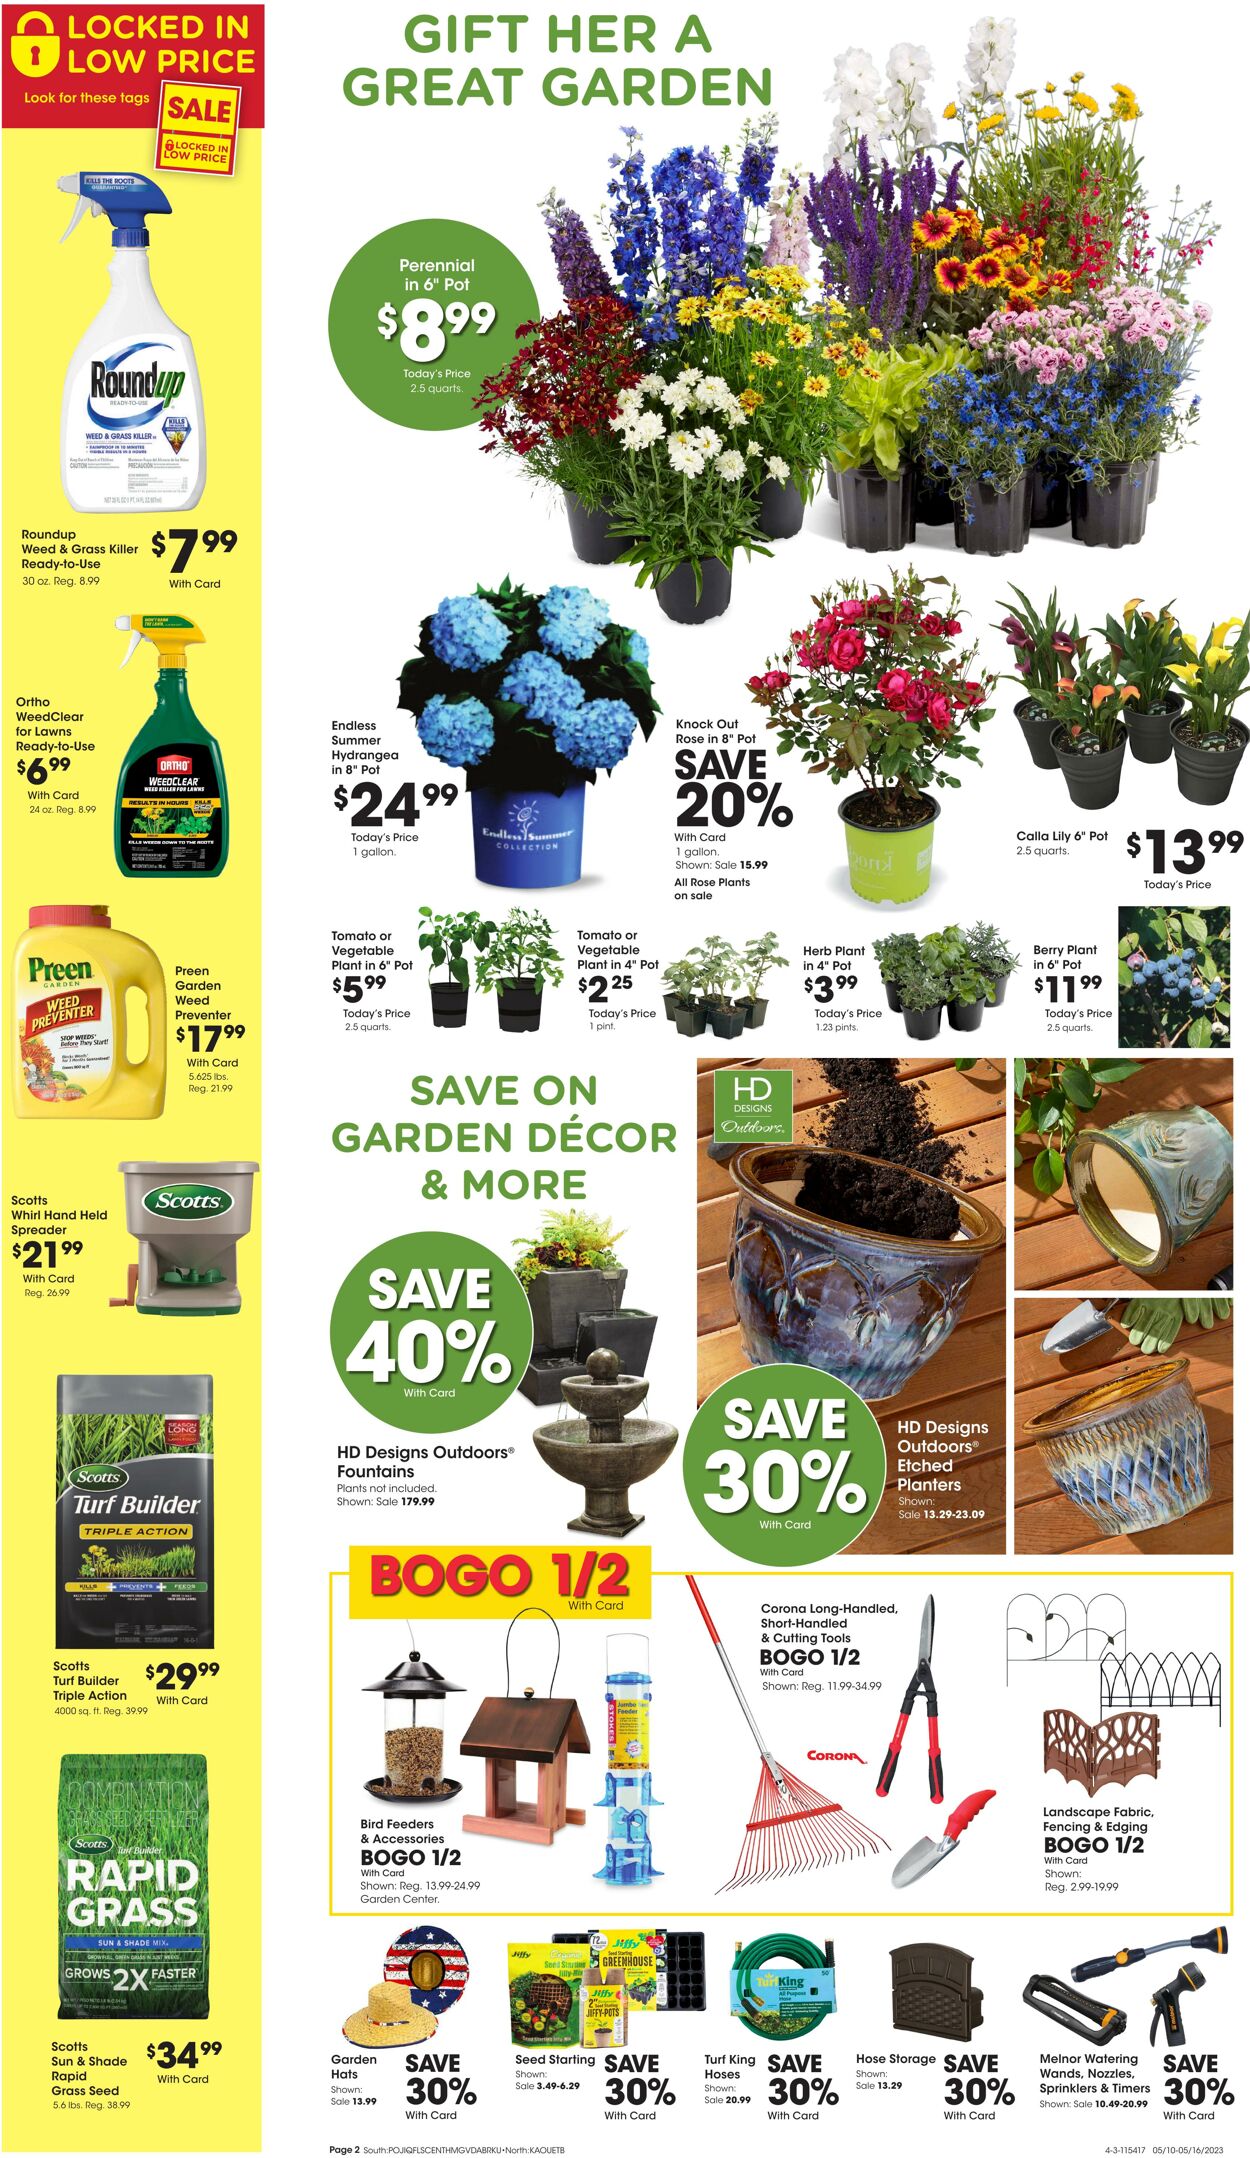 Weekly ad Fred Meyer 05/10/2023 - 05/16/2023